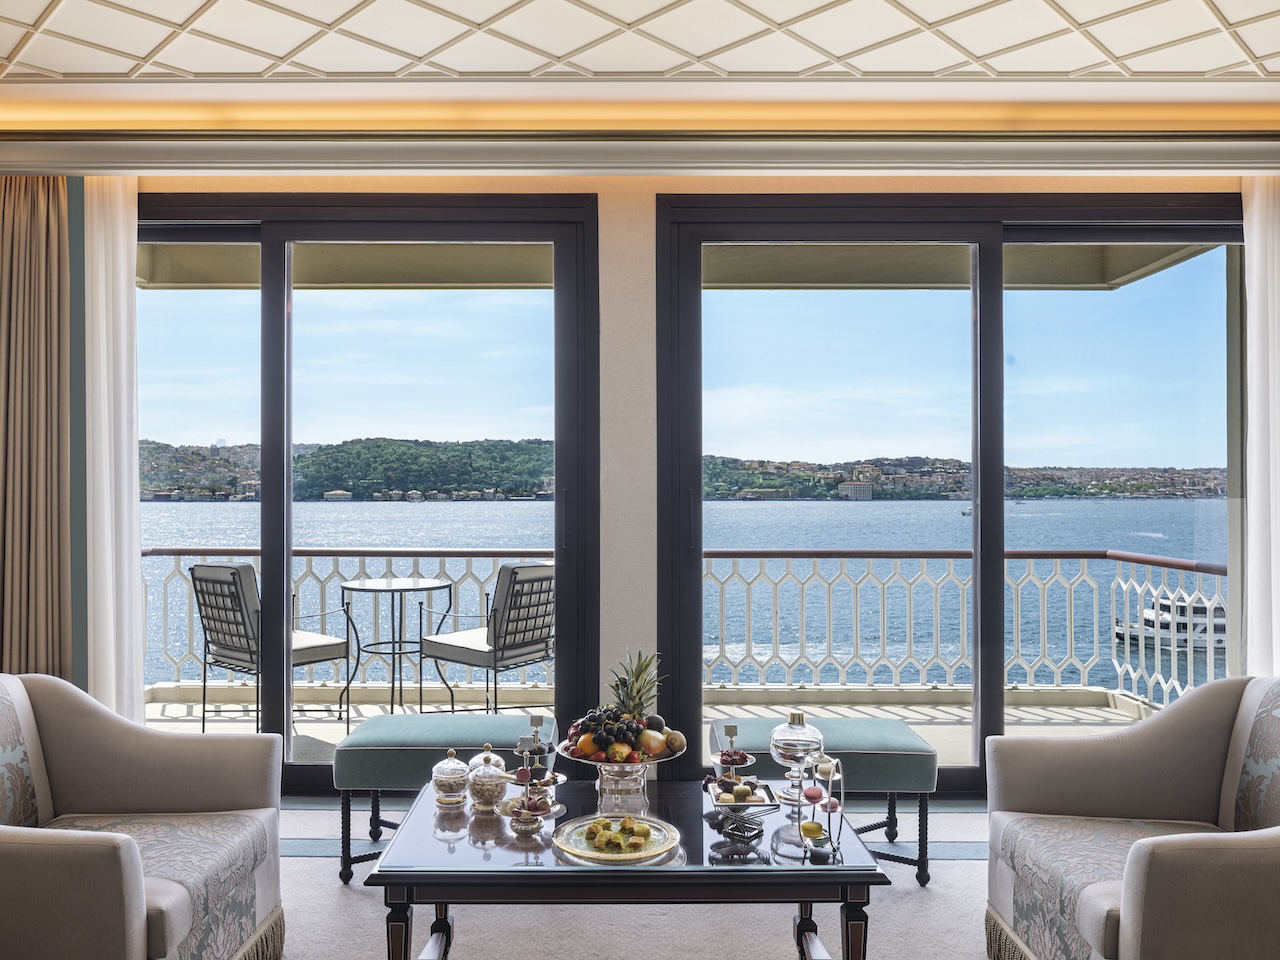  You’ll live like the Sultans of Constantinople at Çırağan Palace Kempinski, Istanbul’s most luxurious waterfront retreat.